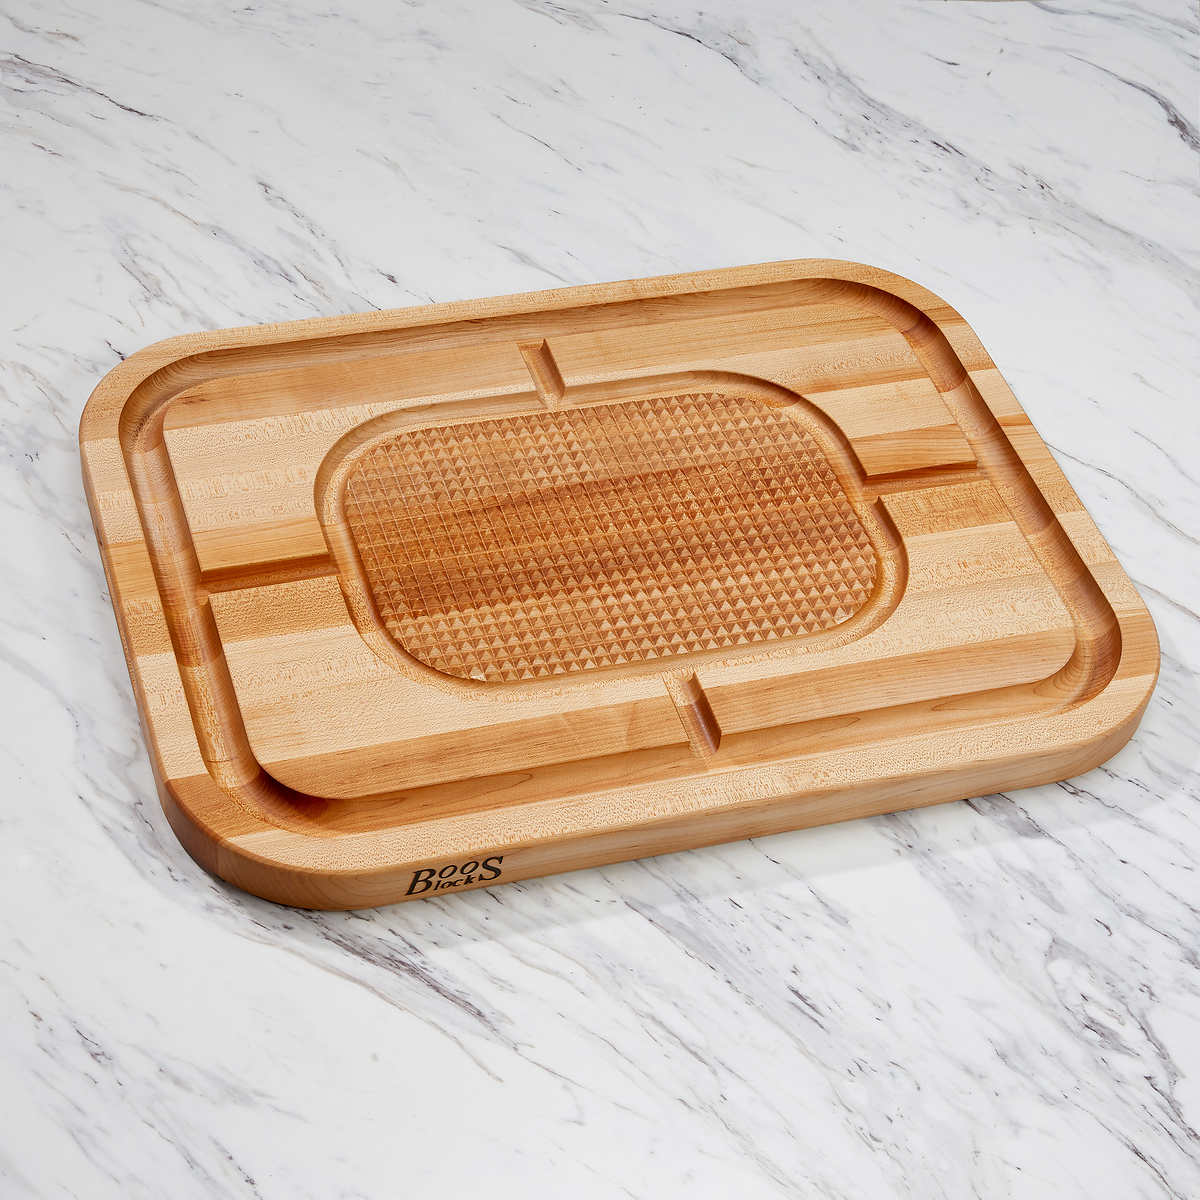 John Boos Maple Edge-Grain Cutting Board Review - Forbes Vetted